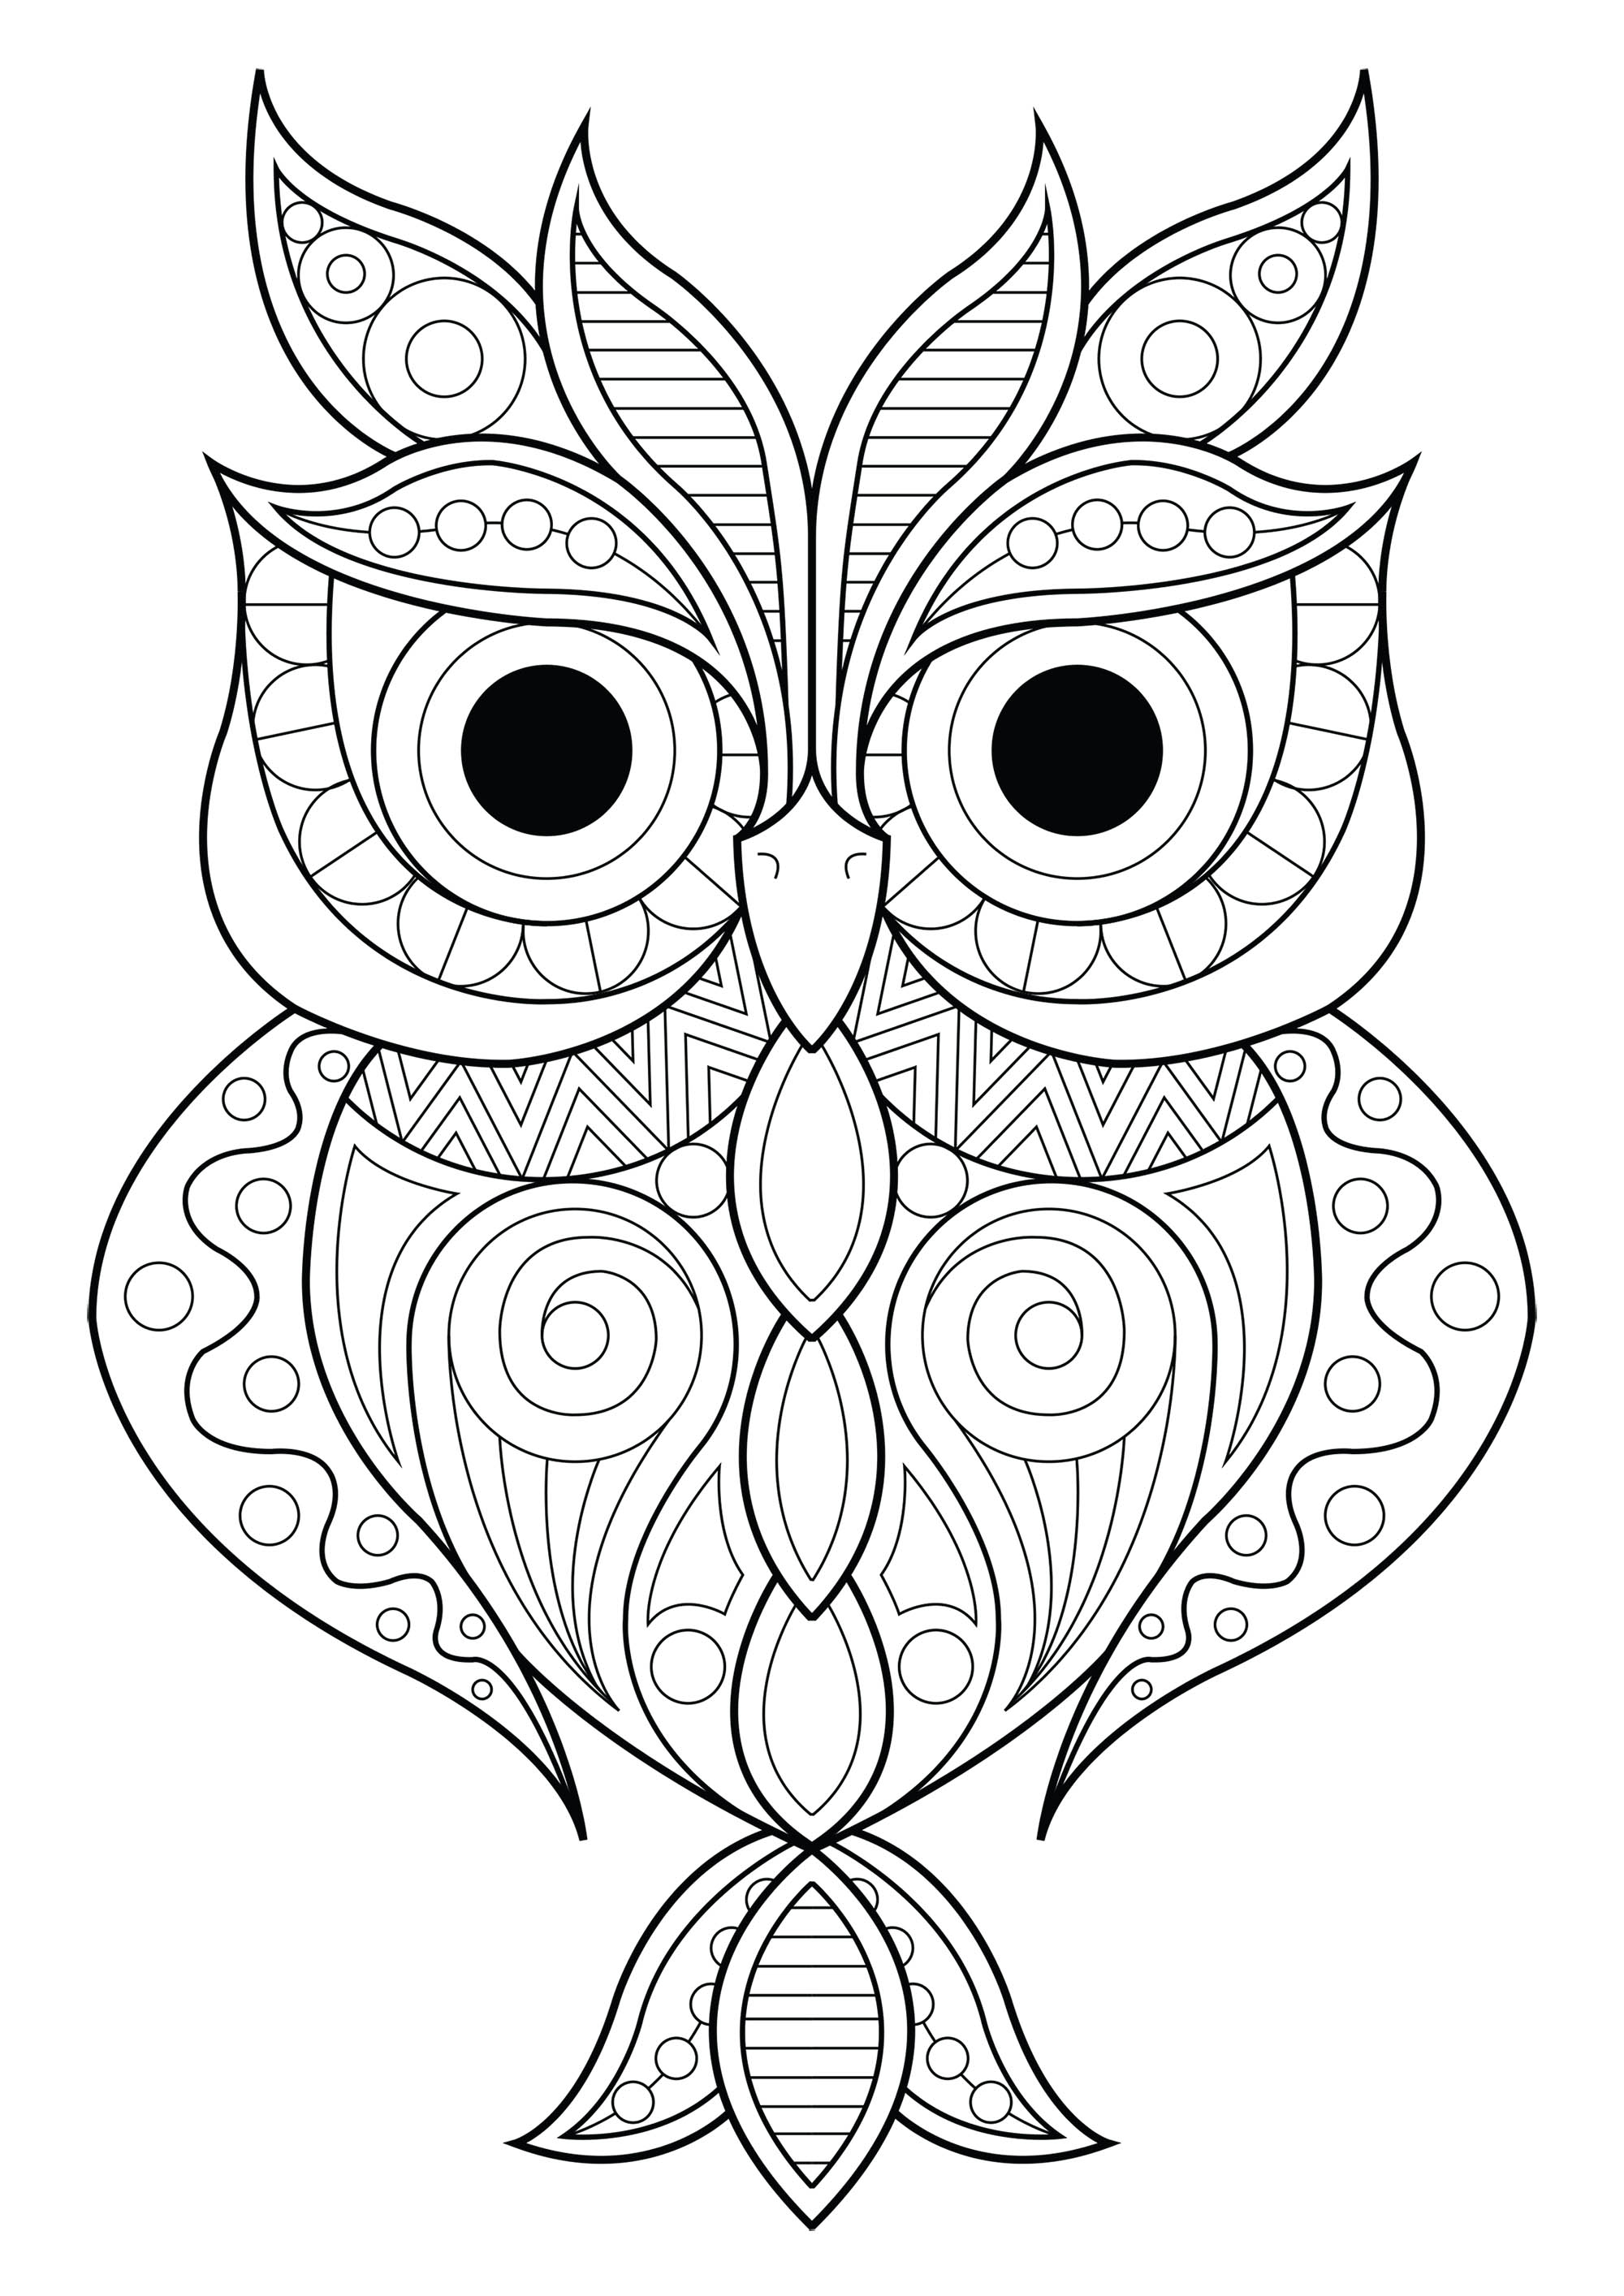 Owl simple patterns 2 - Owls Adult Coloring Pages